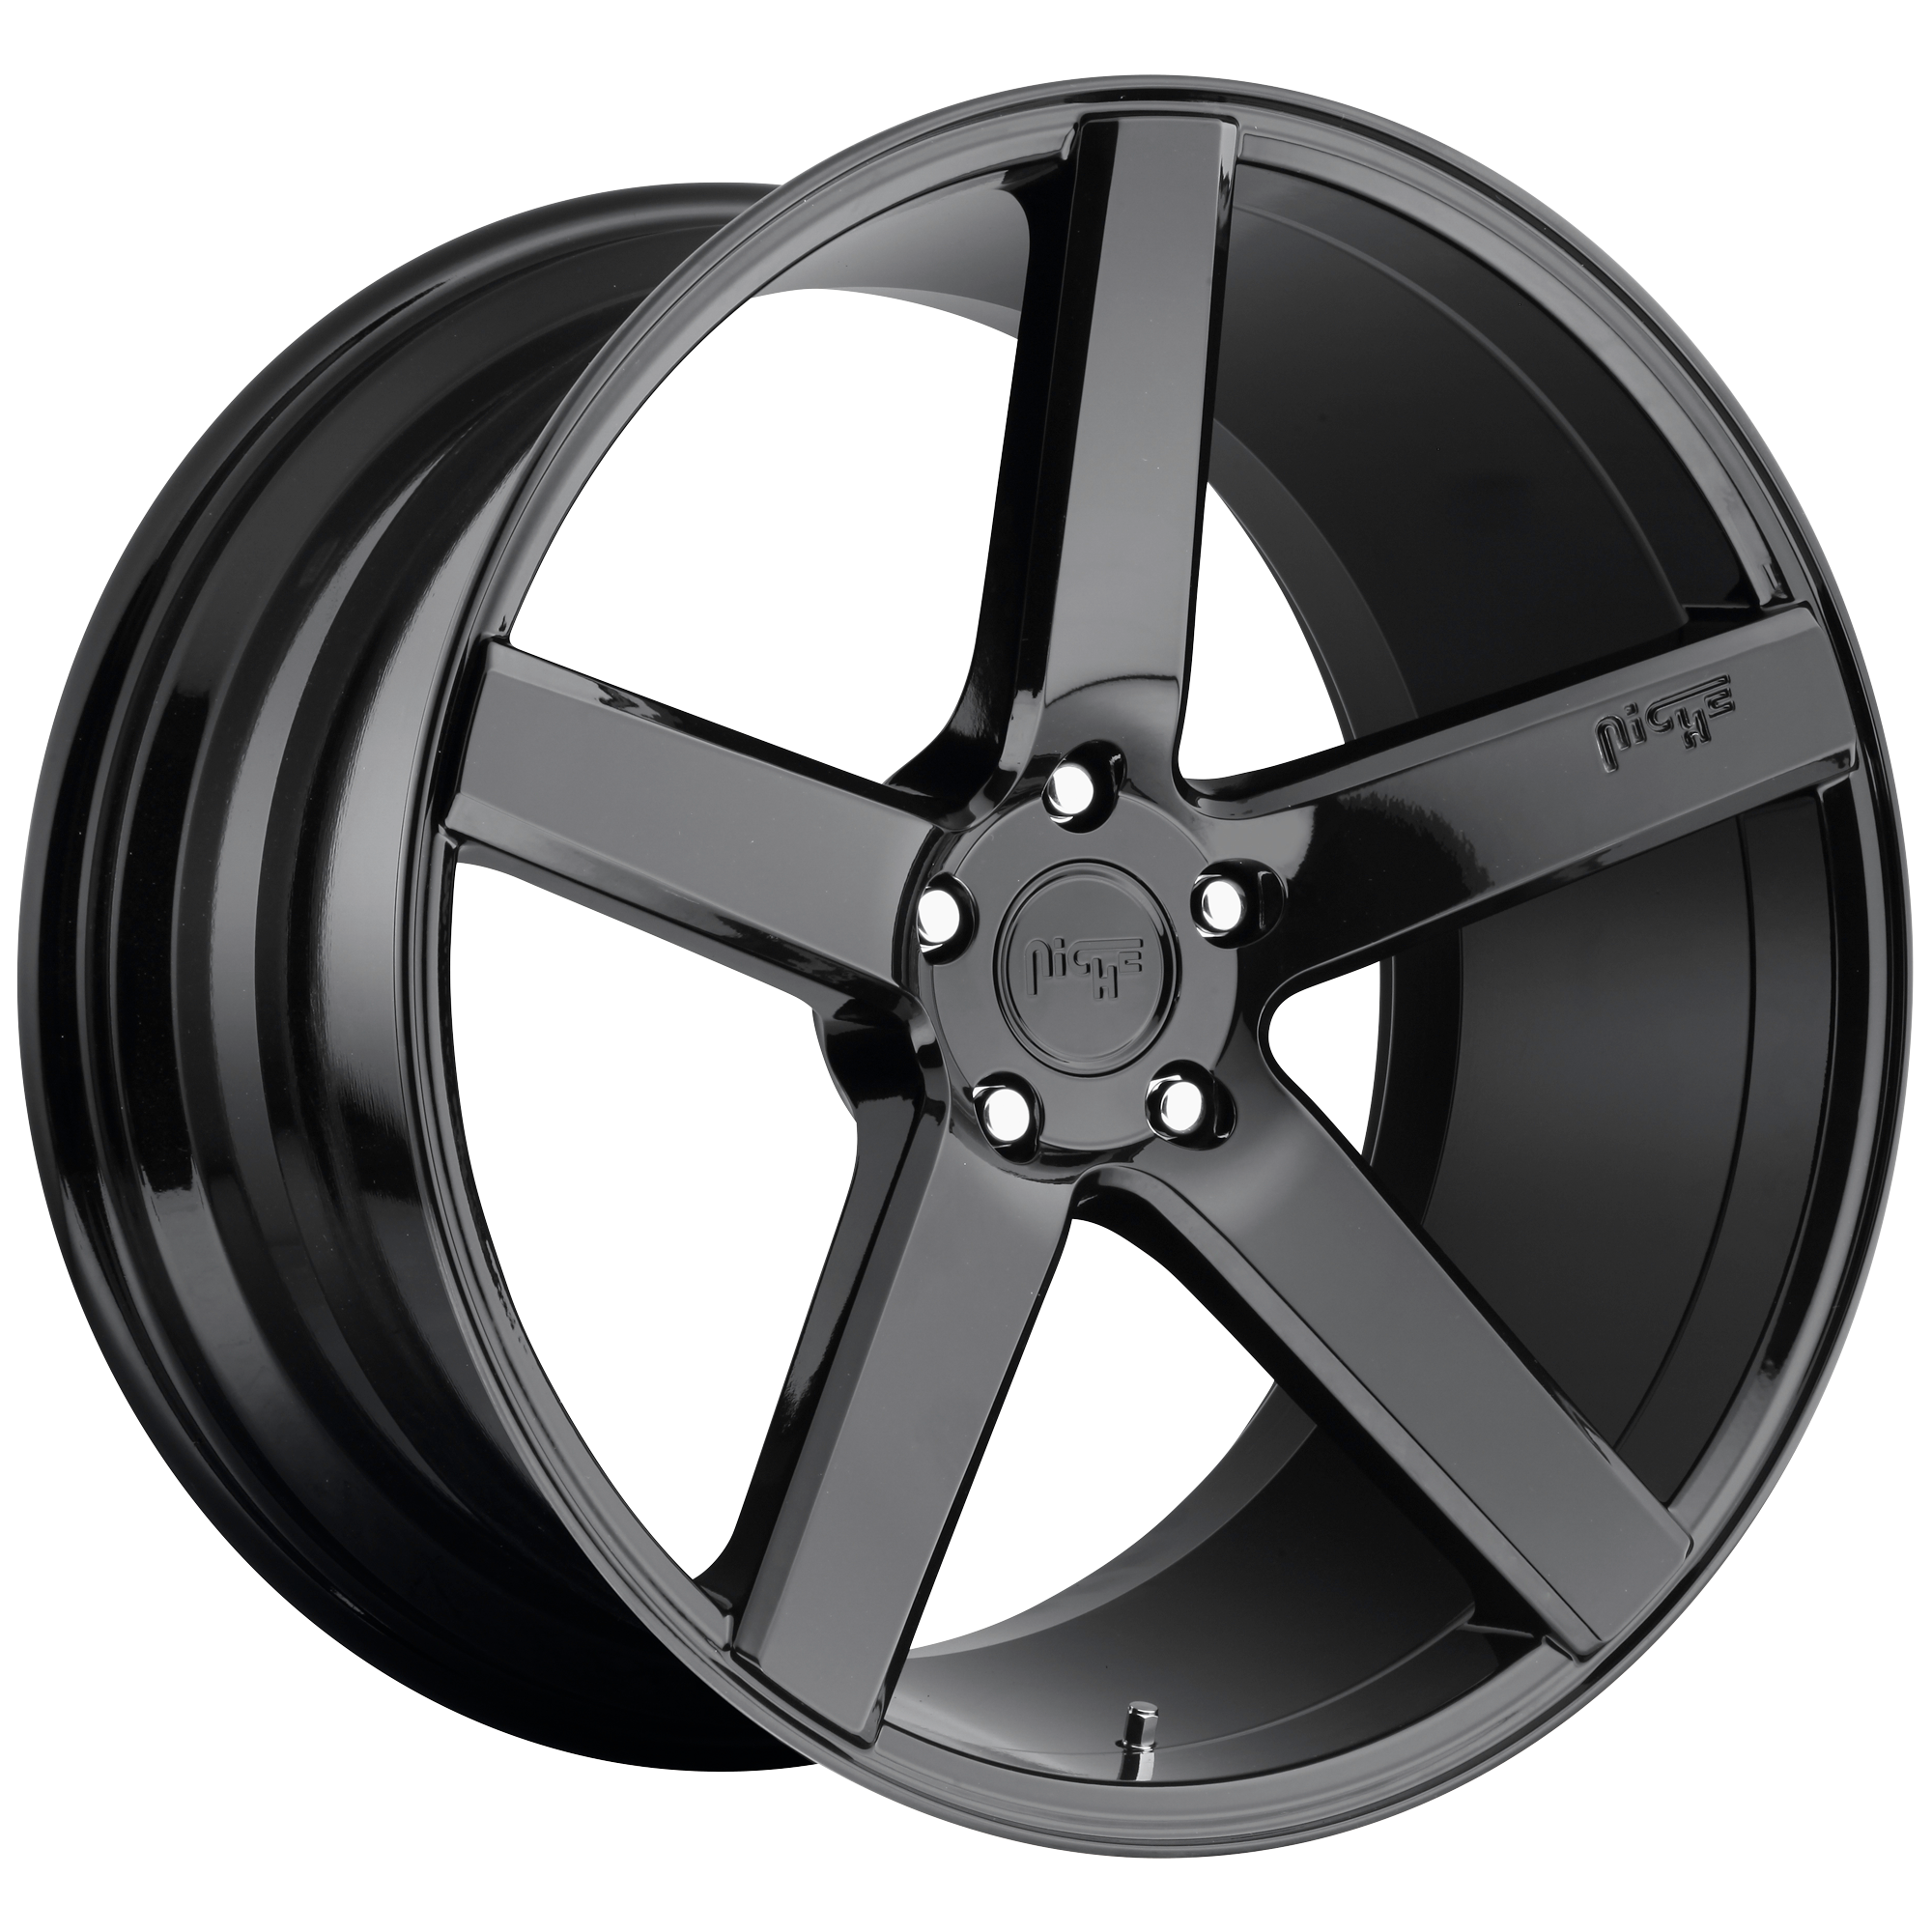 MILAN 20x10 5x120.00 GLOSS BLACK (40 mm) - Tires and Engine Performance